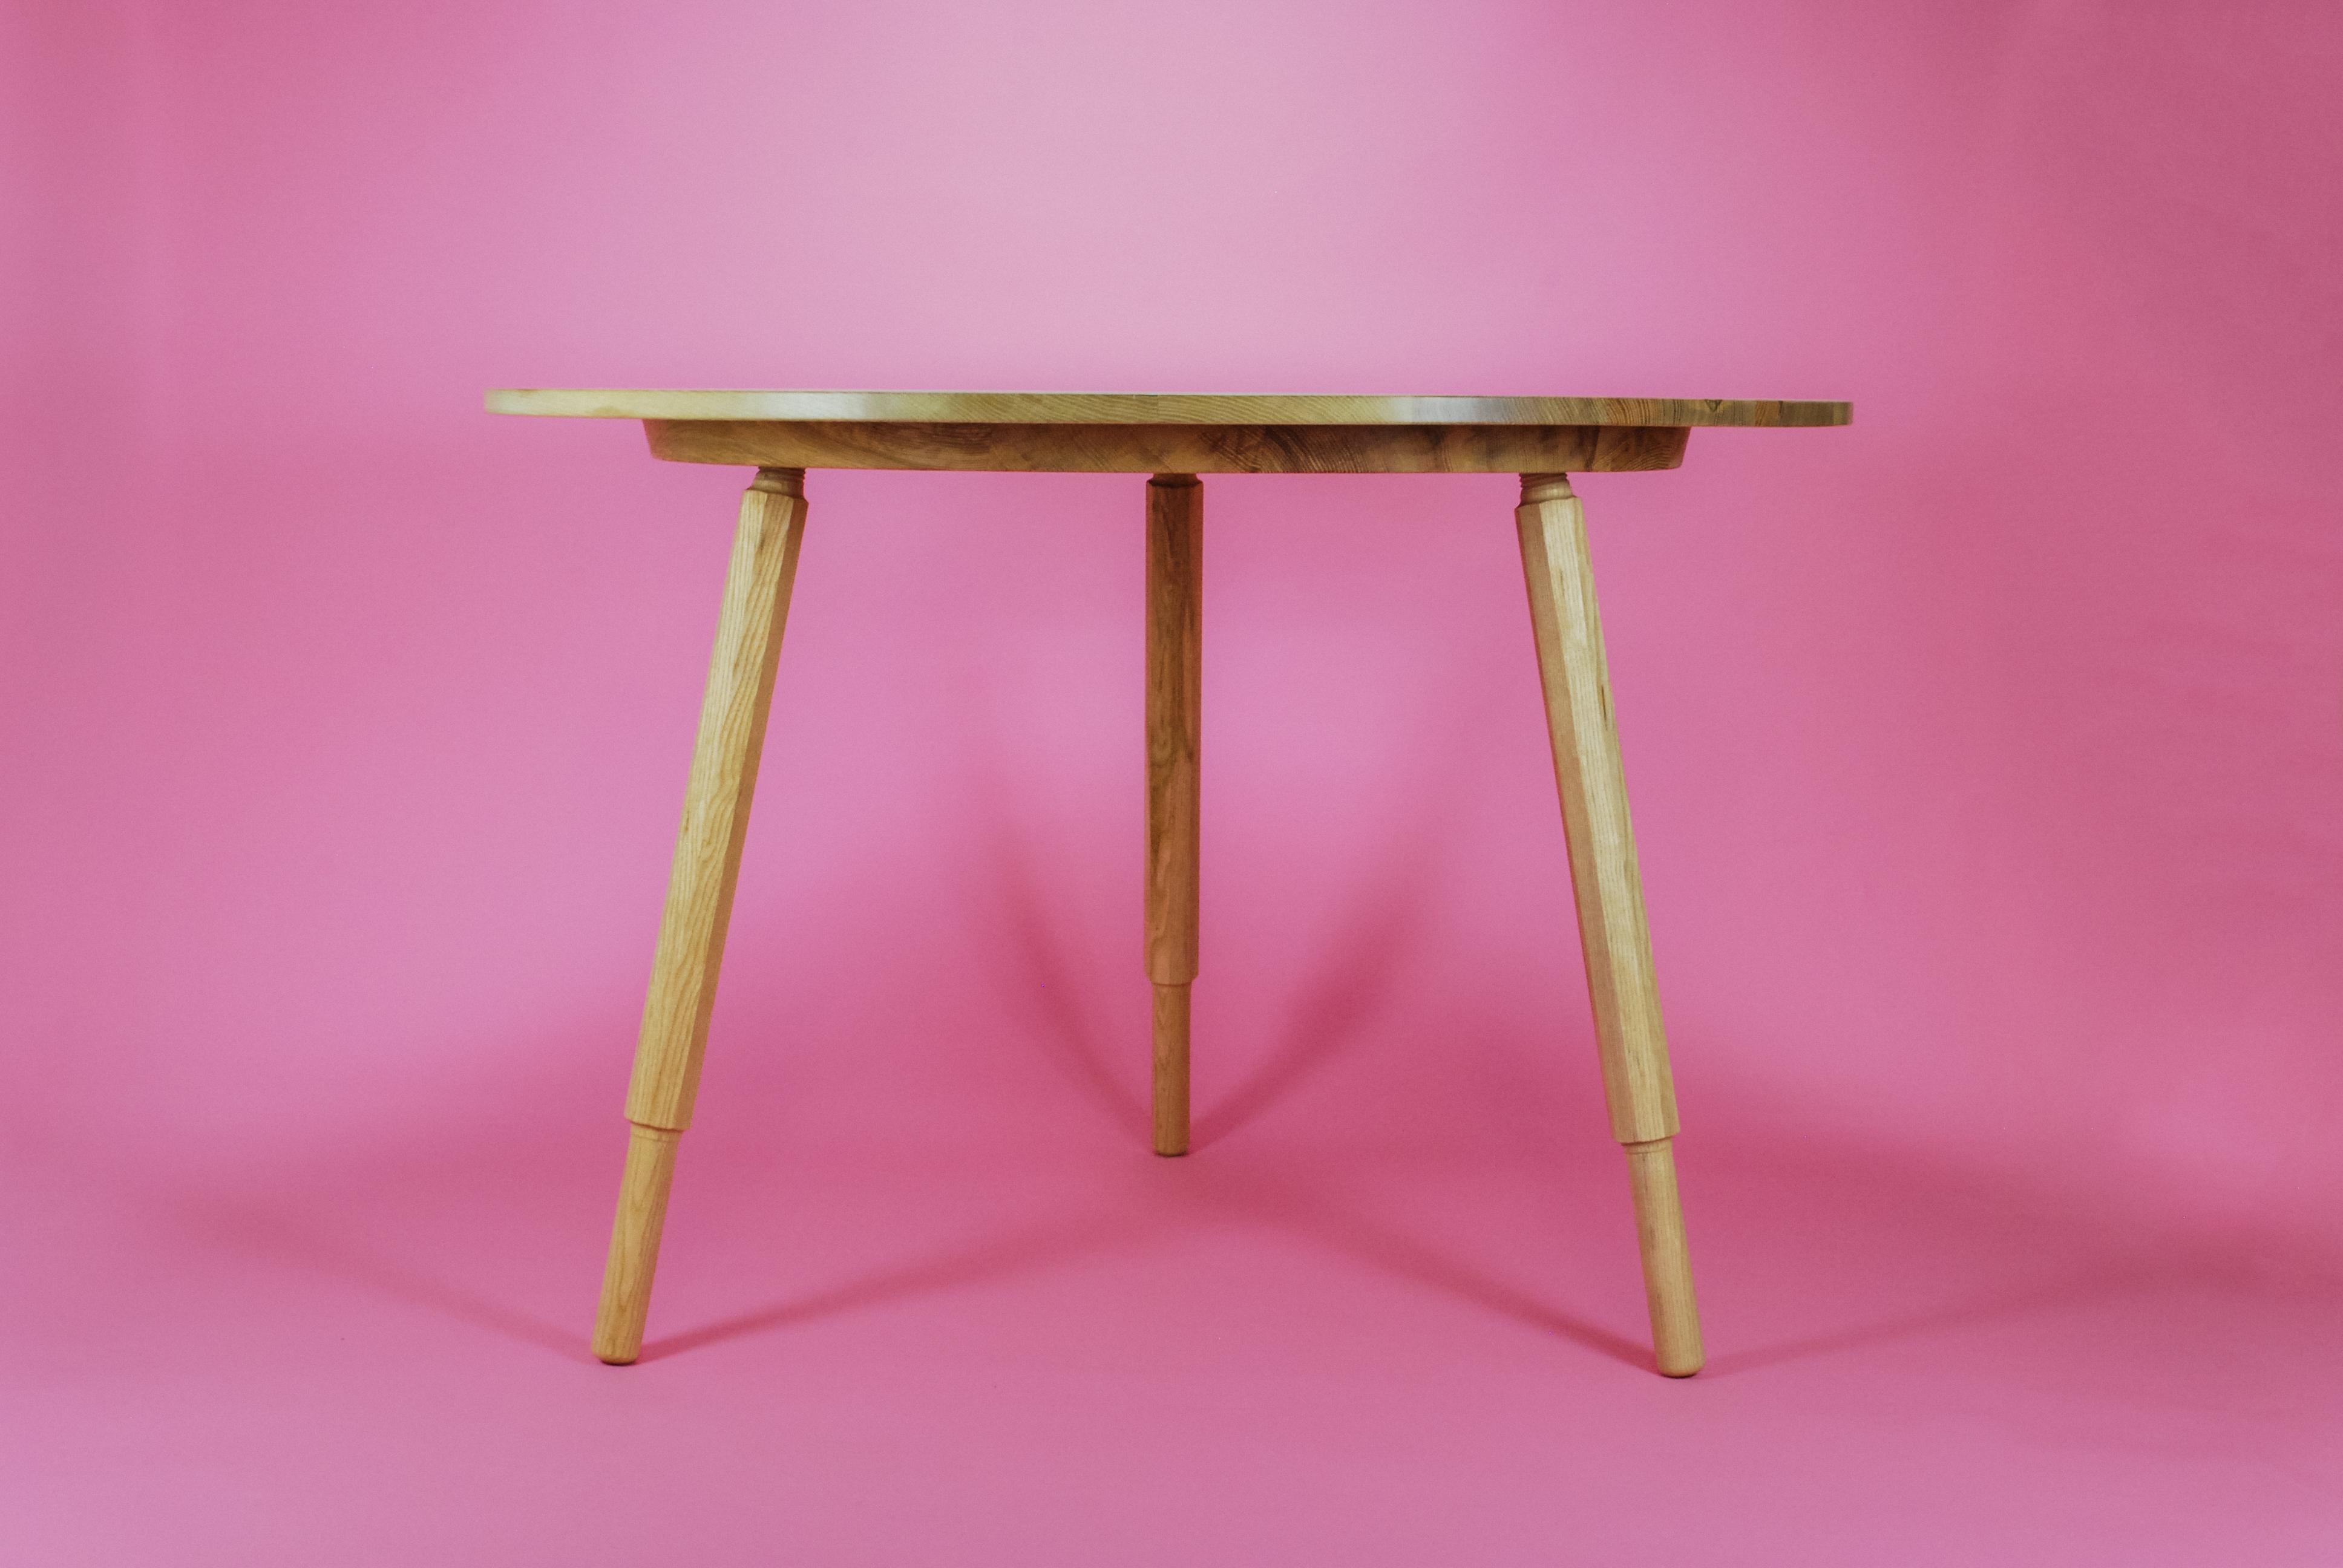 Handmade Round Wooden Dining Table in English Ash, with screw in legs.
The hand turned legs come separately and simply screw in to the solid table top.
The legs are designed with a unique octagonal shape, with smooth round feet at the bottom. The